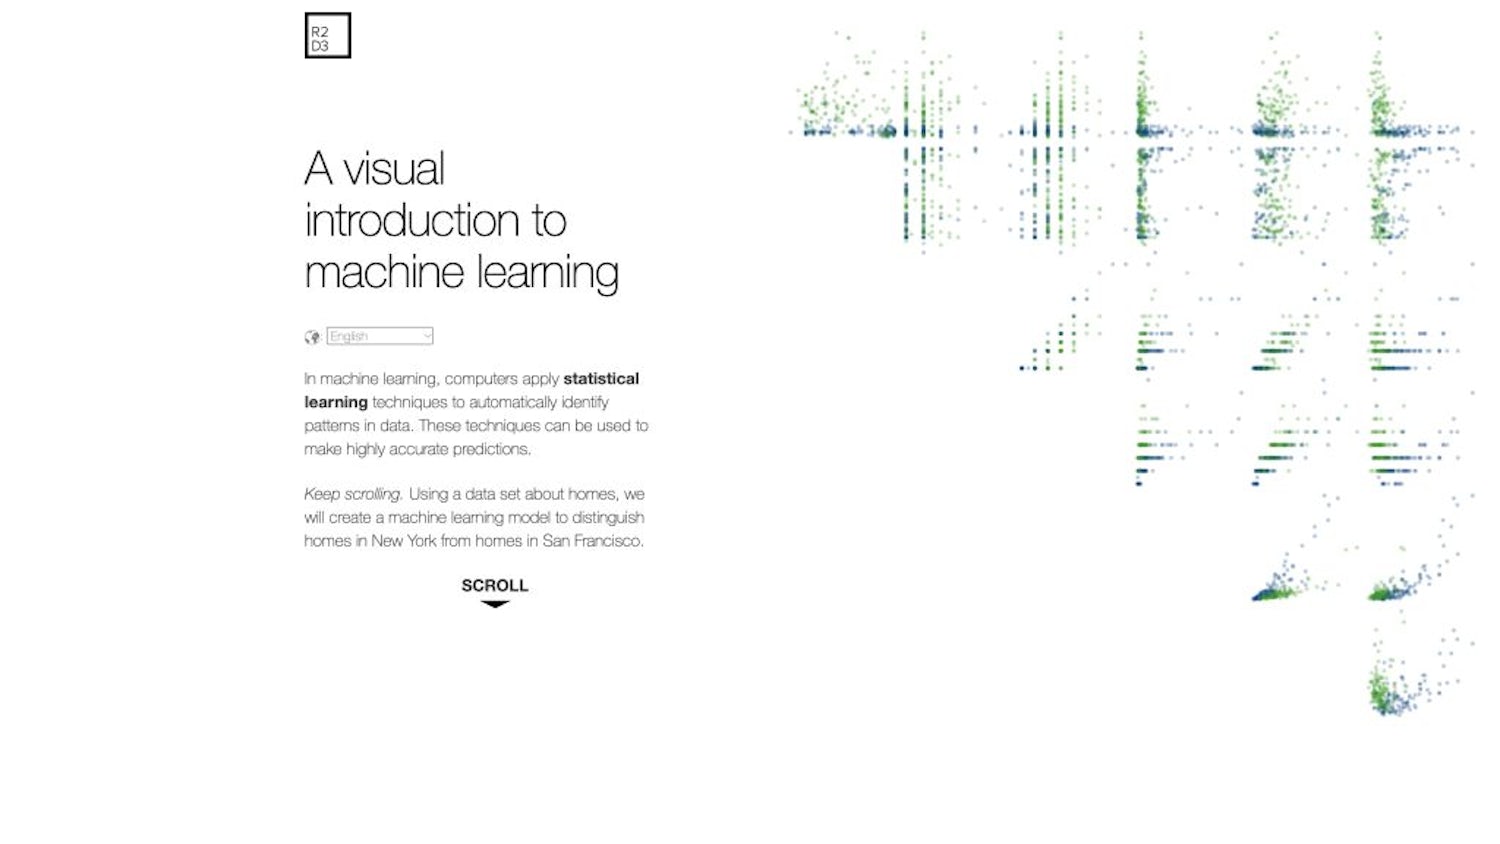 A visual introduction to machine learning landing screen